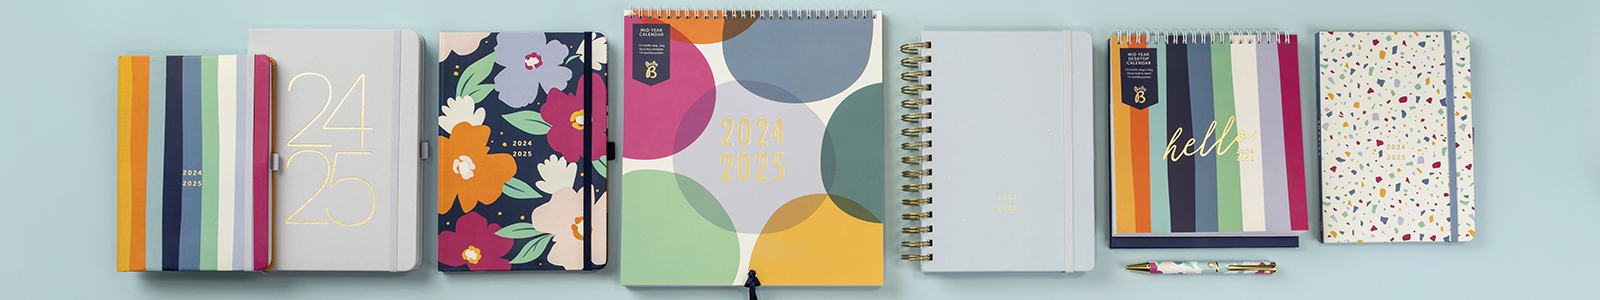 Mid-Year Diaries & Calendars Banner Image